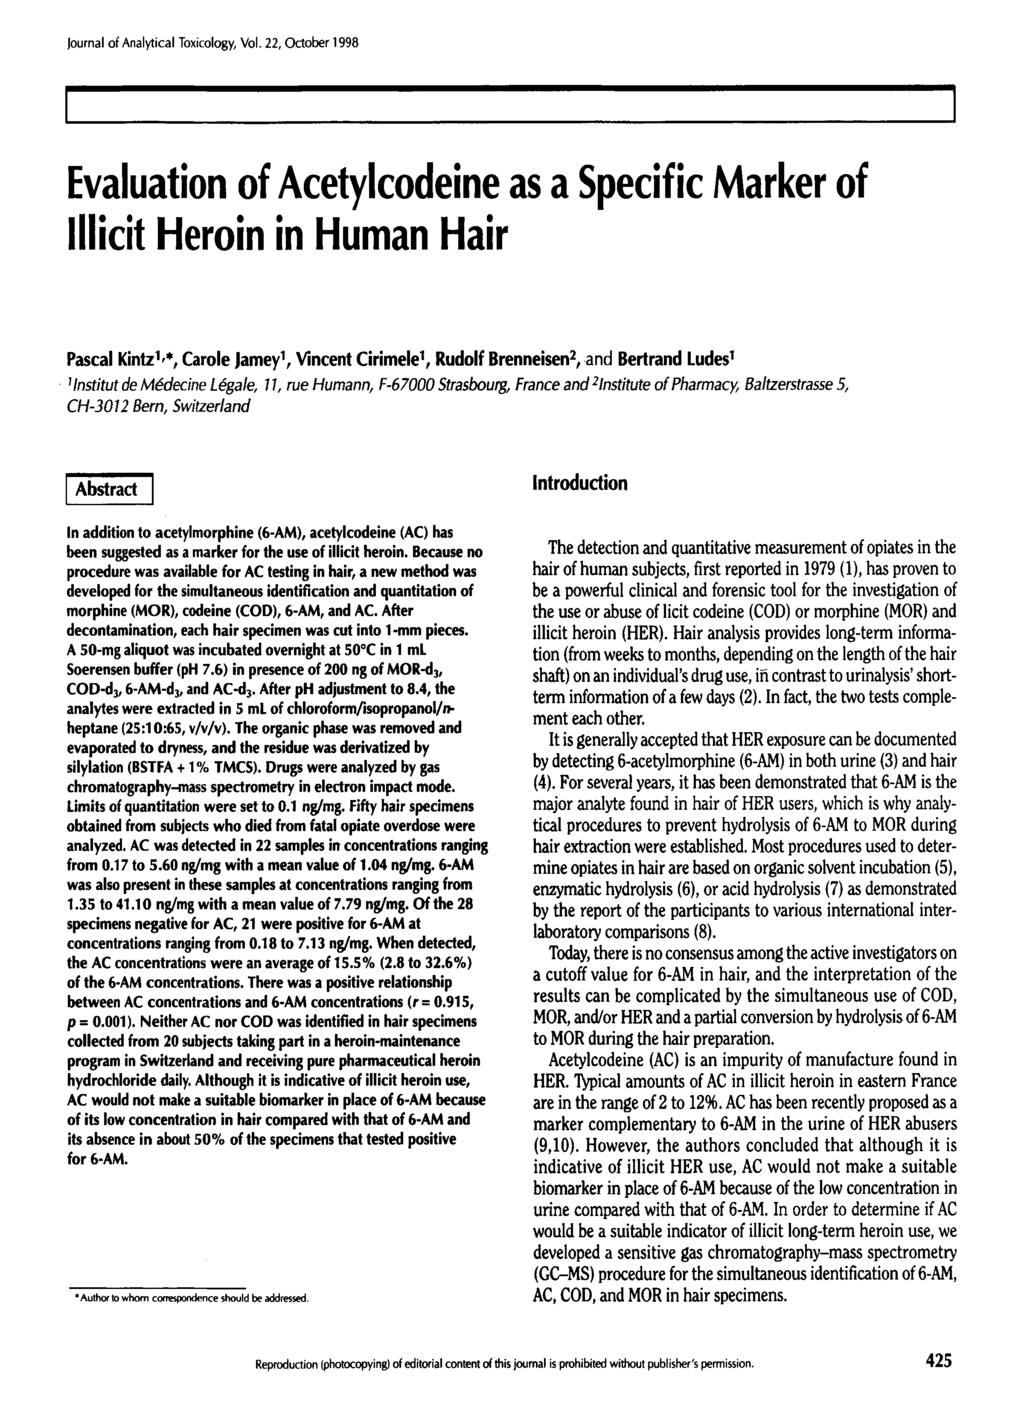 Evaluation of Acetylcodeine as a Specific Marker of Illicit Heroin in Human Hair Pascal Kintzl, *, Carole Jamey 1, Vincent Cirimele 1, Rudolf Brenneisen 2, and Bertrand Ludes 1 9 l lnstitut de